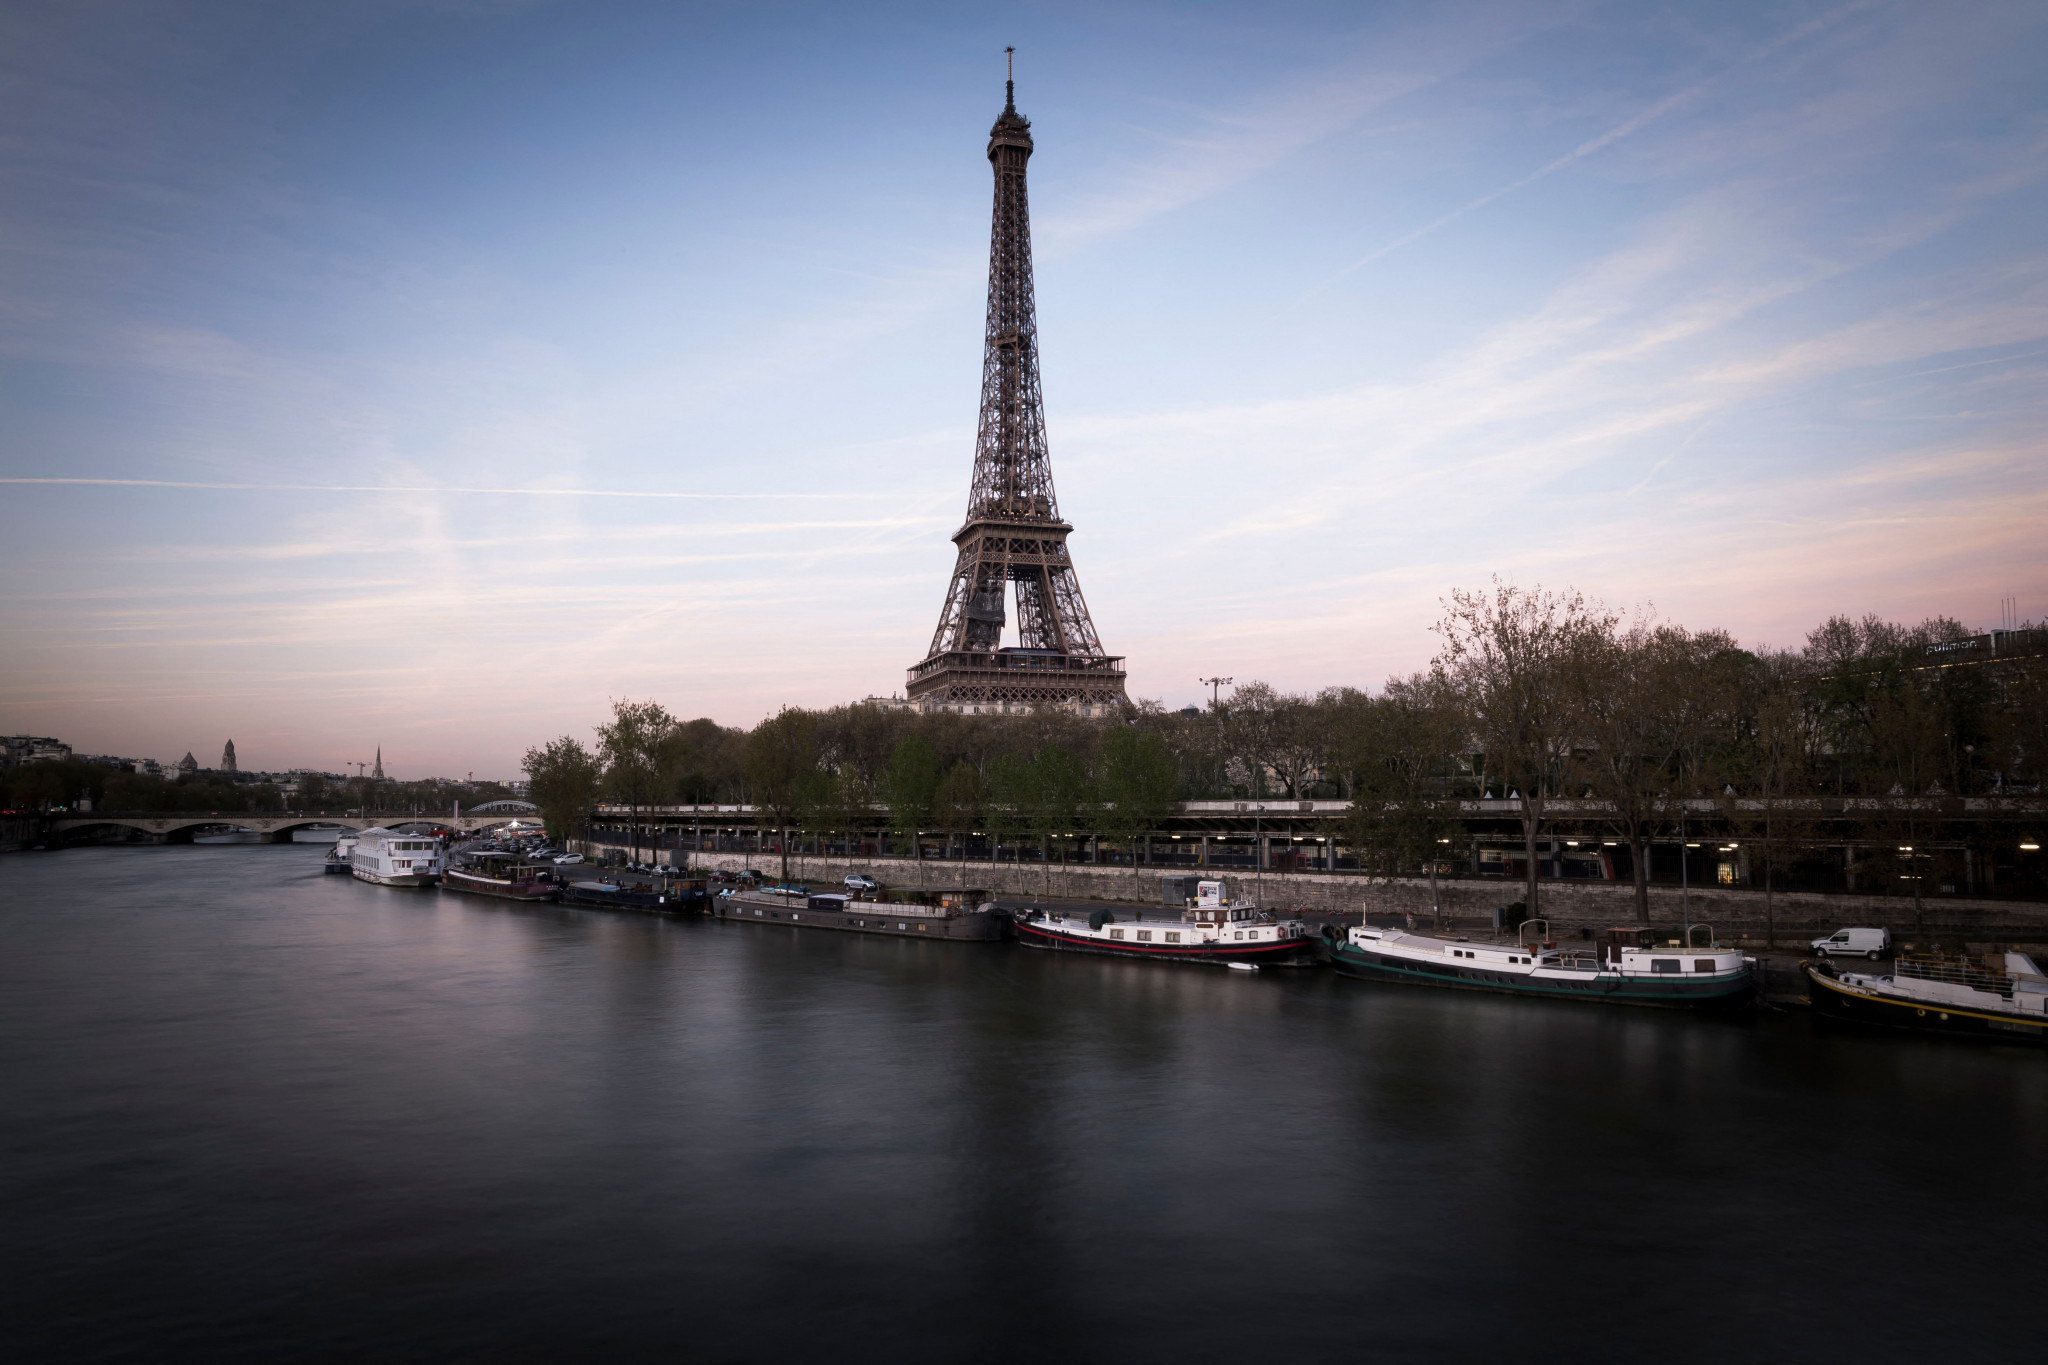 Major overhaul to waterworks to begin next month in time for Paris 2024